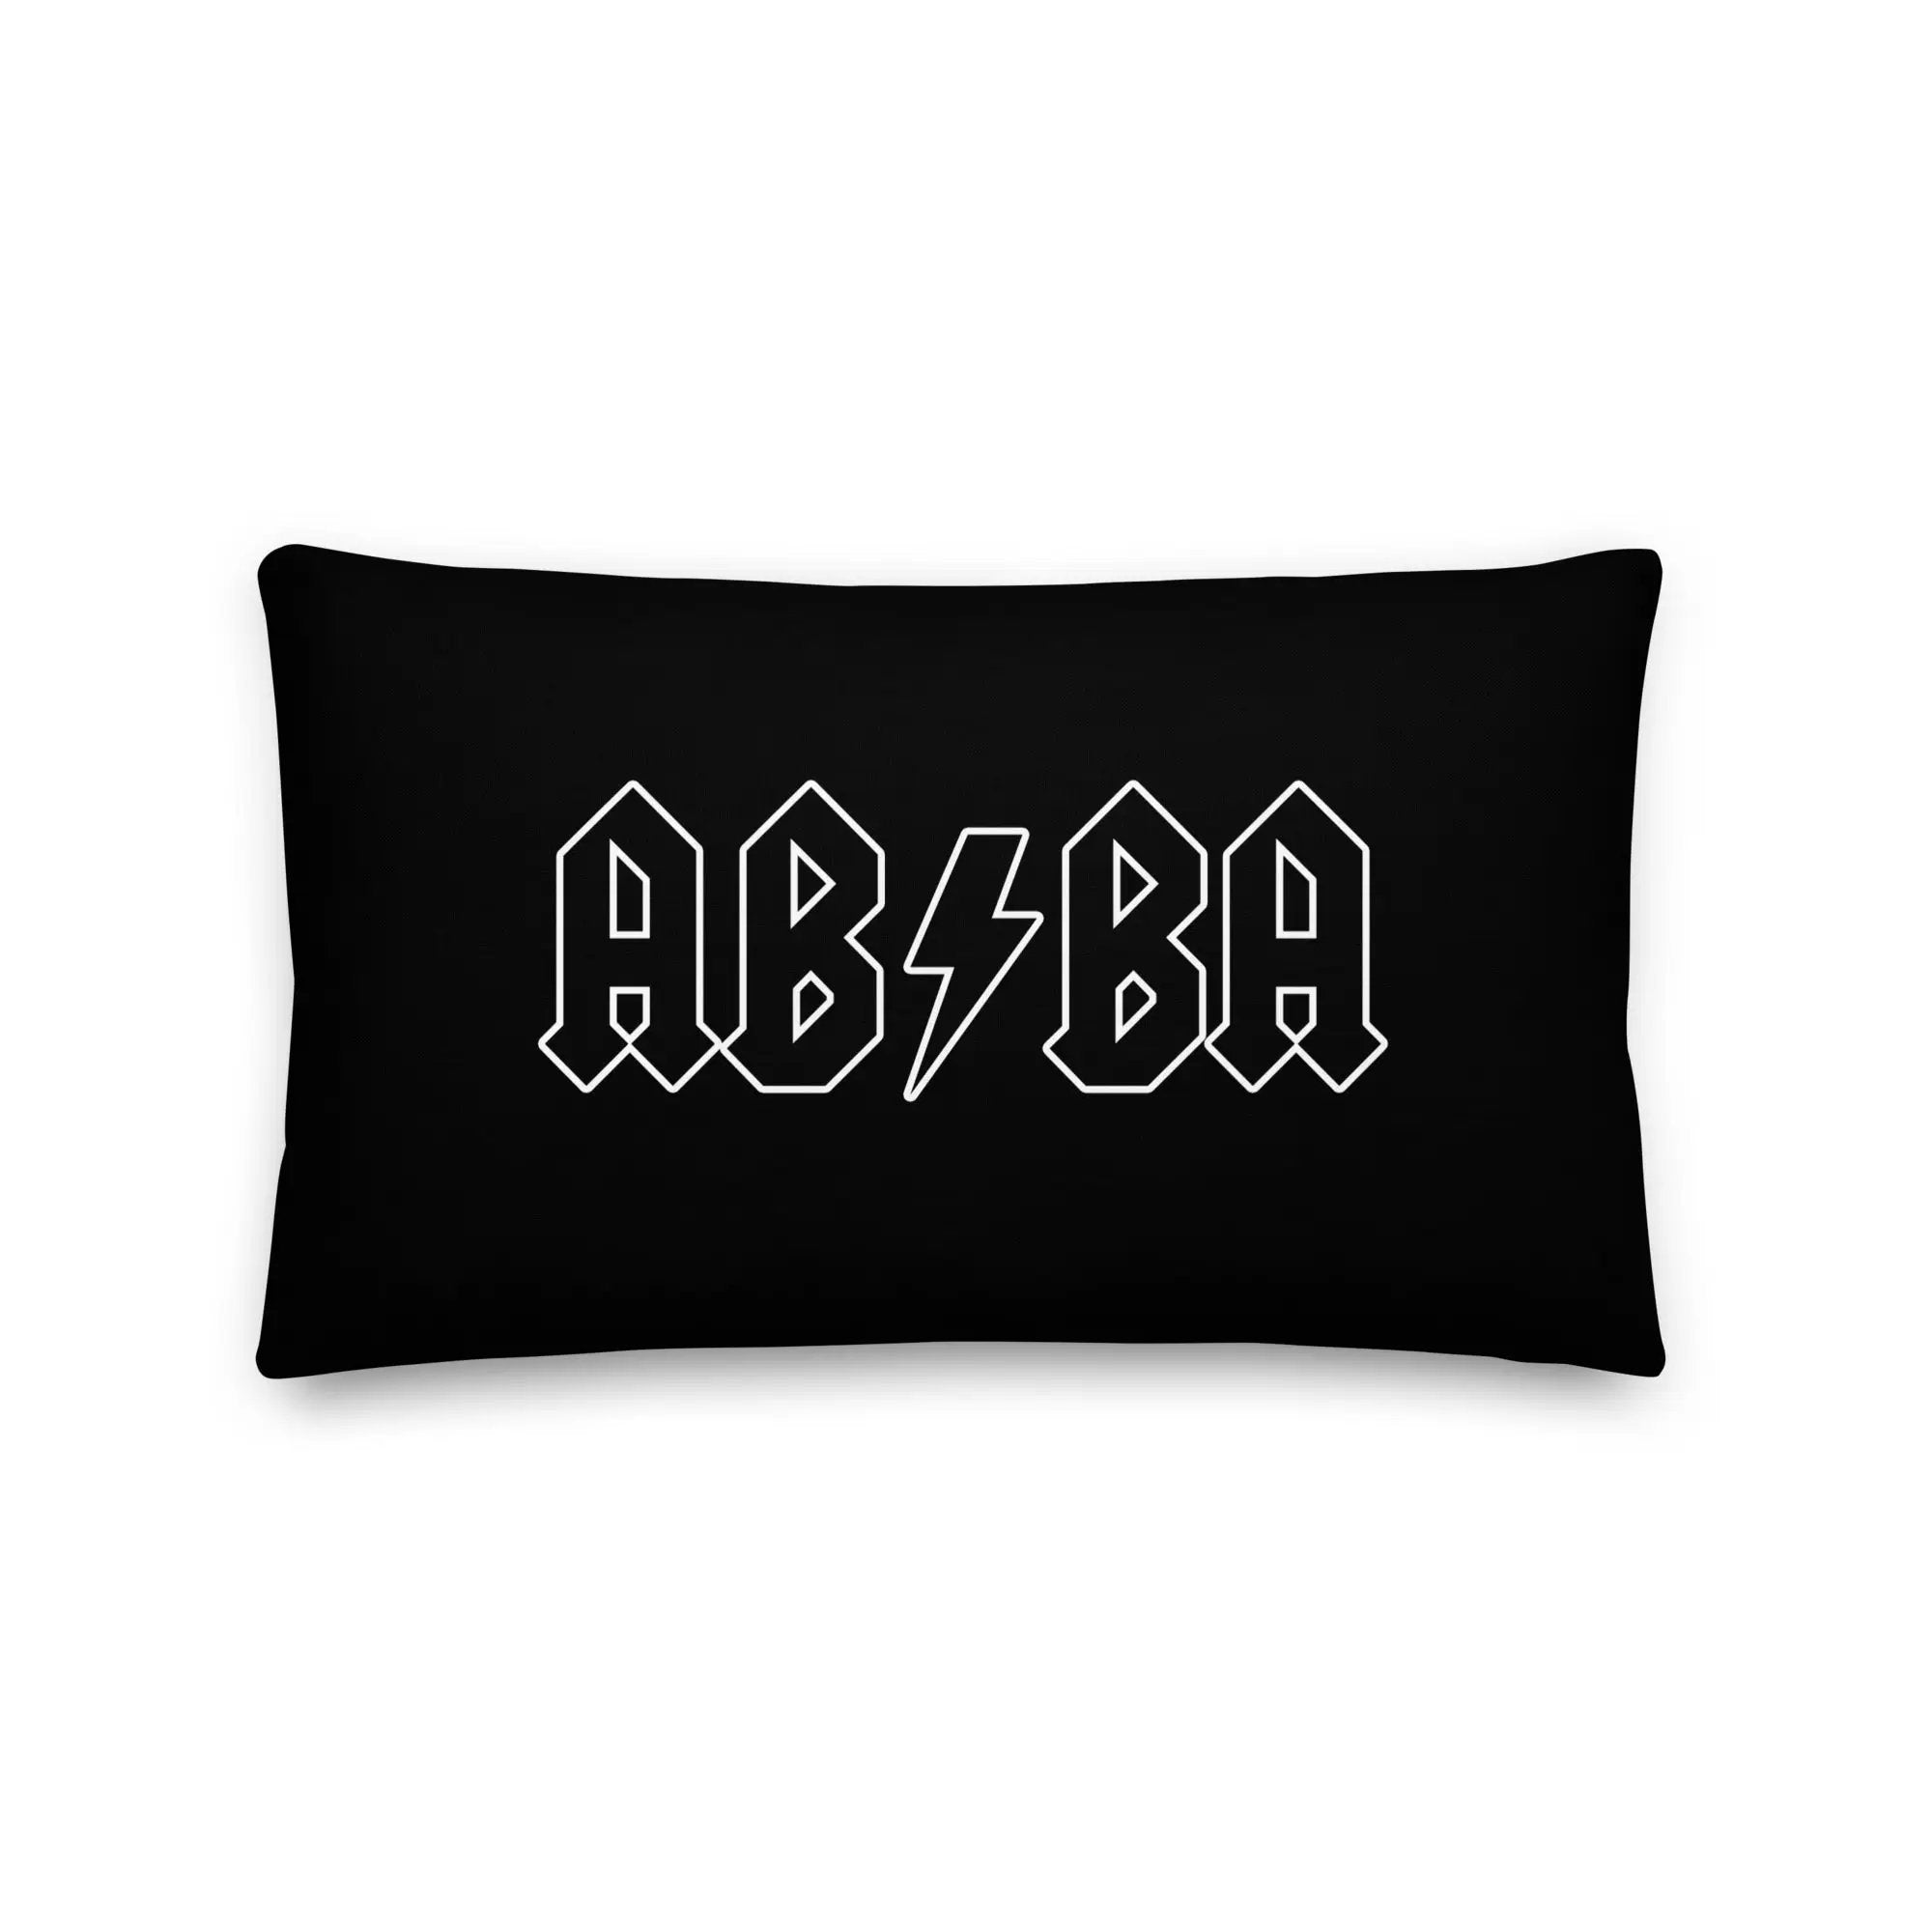 Black pillow with AB/BA on it